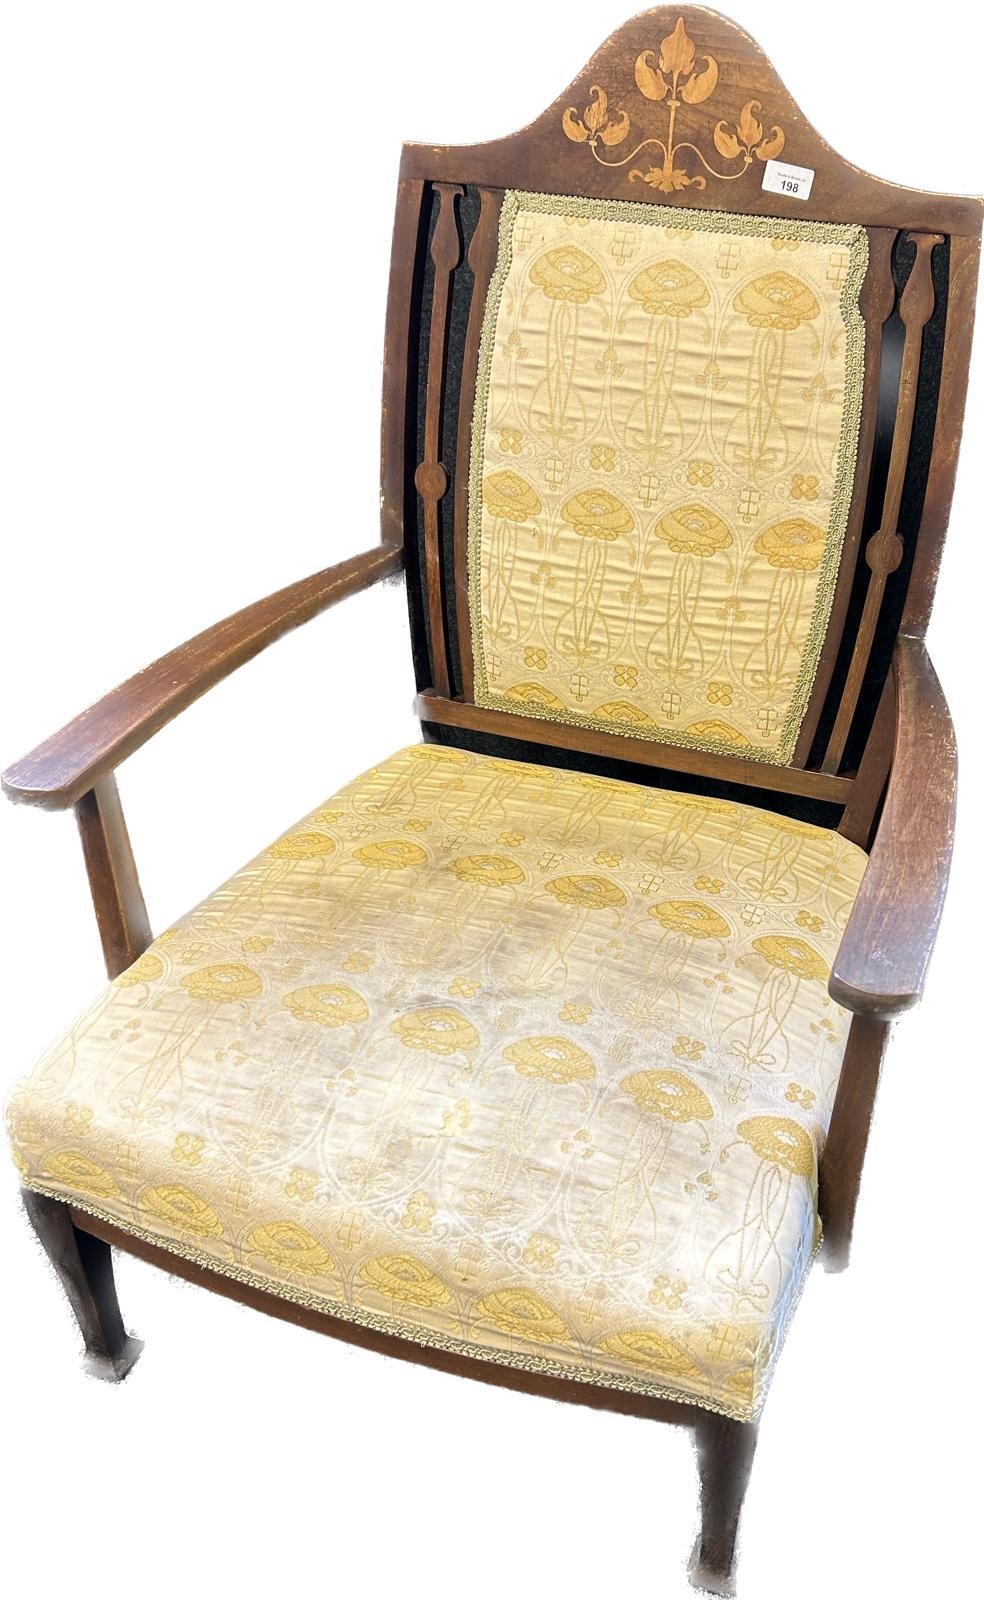 Antique Rennie Mackintosh style chair with marquetry inlay. - Image 2 of 2